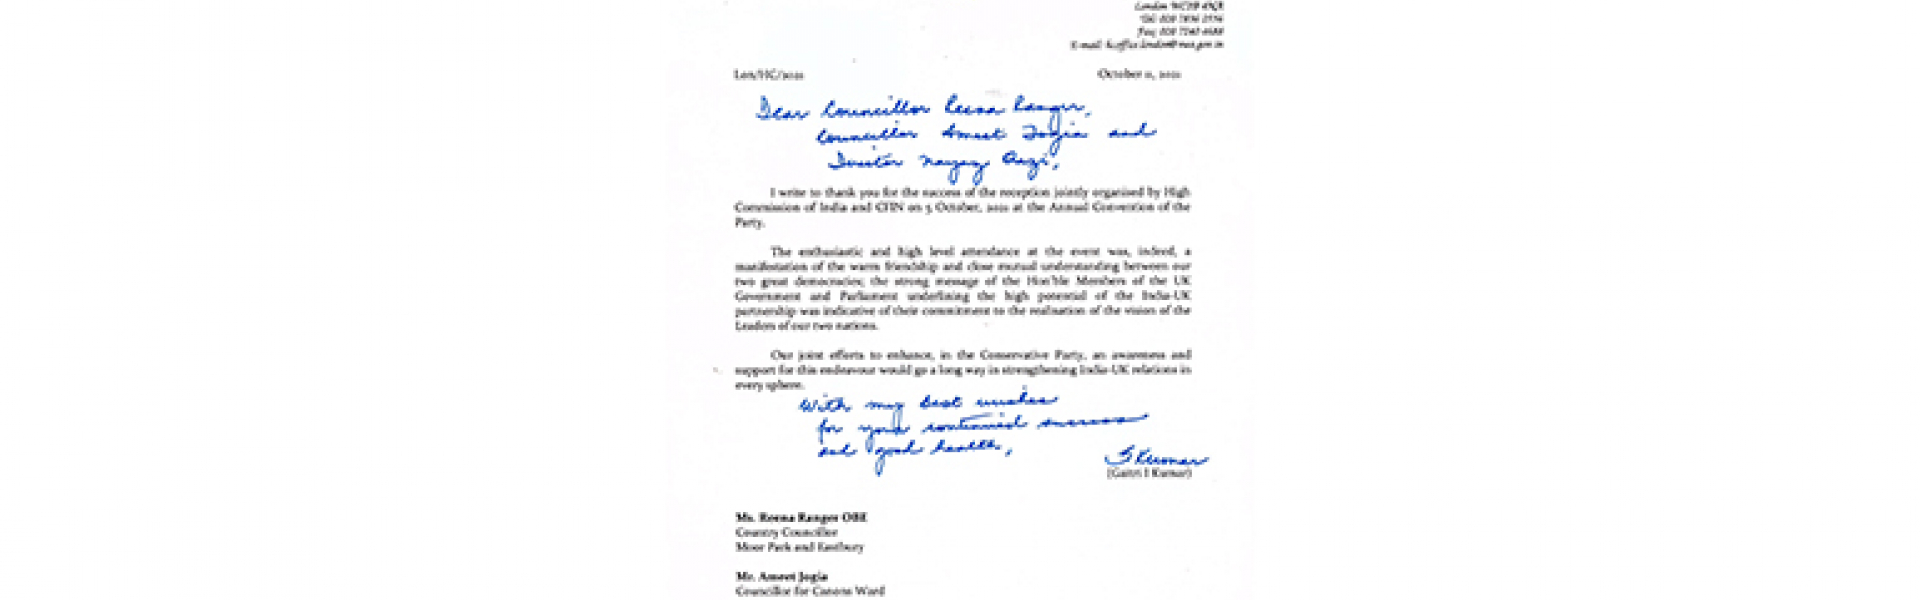 Thank you letter from High Commissioner of India, H.E. Gaitri Issar Kumar